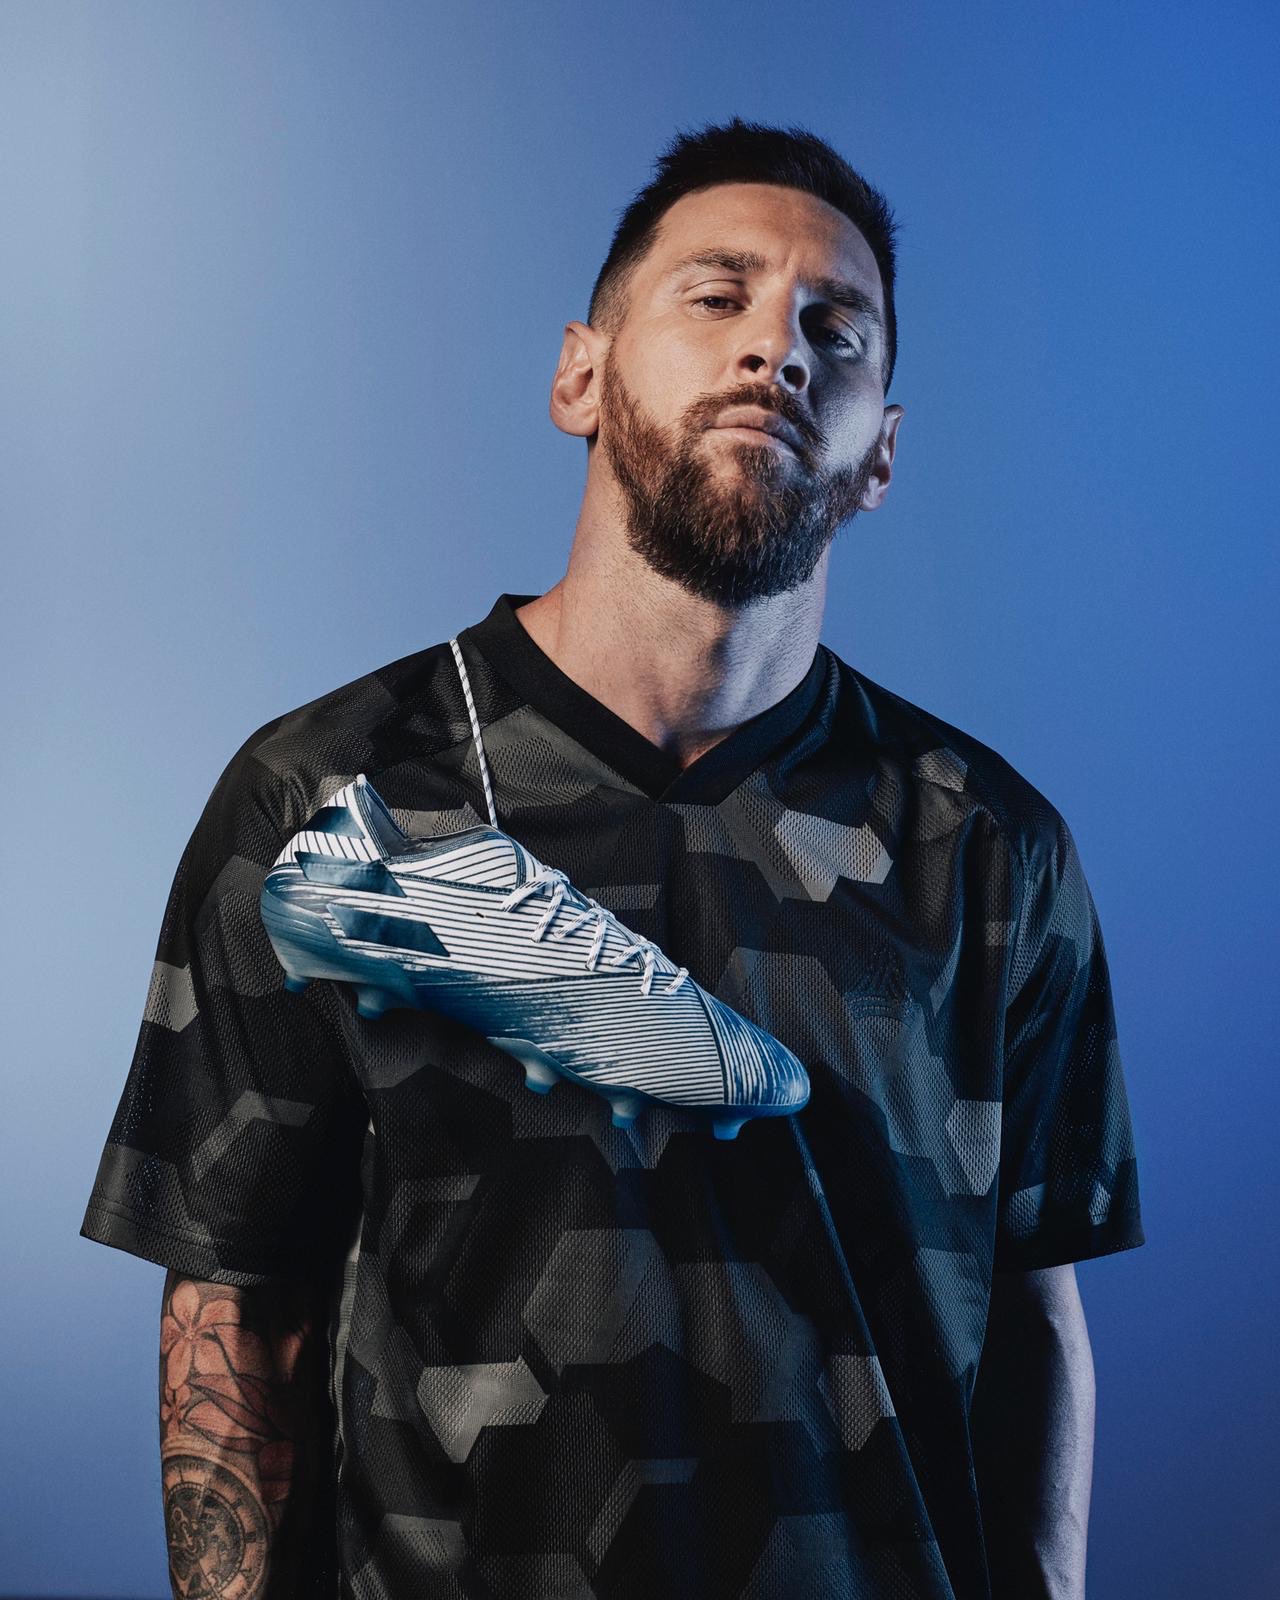 adidas on Twitter: Leo Messi, the first player ever to reach 1️⃣0️⃣0️⃣0️⃣ goal contributions. https://t.co/wRYEoIeilC" / Twitter